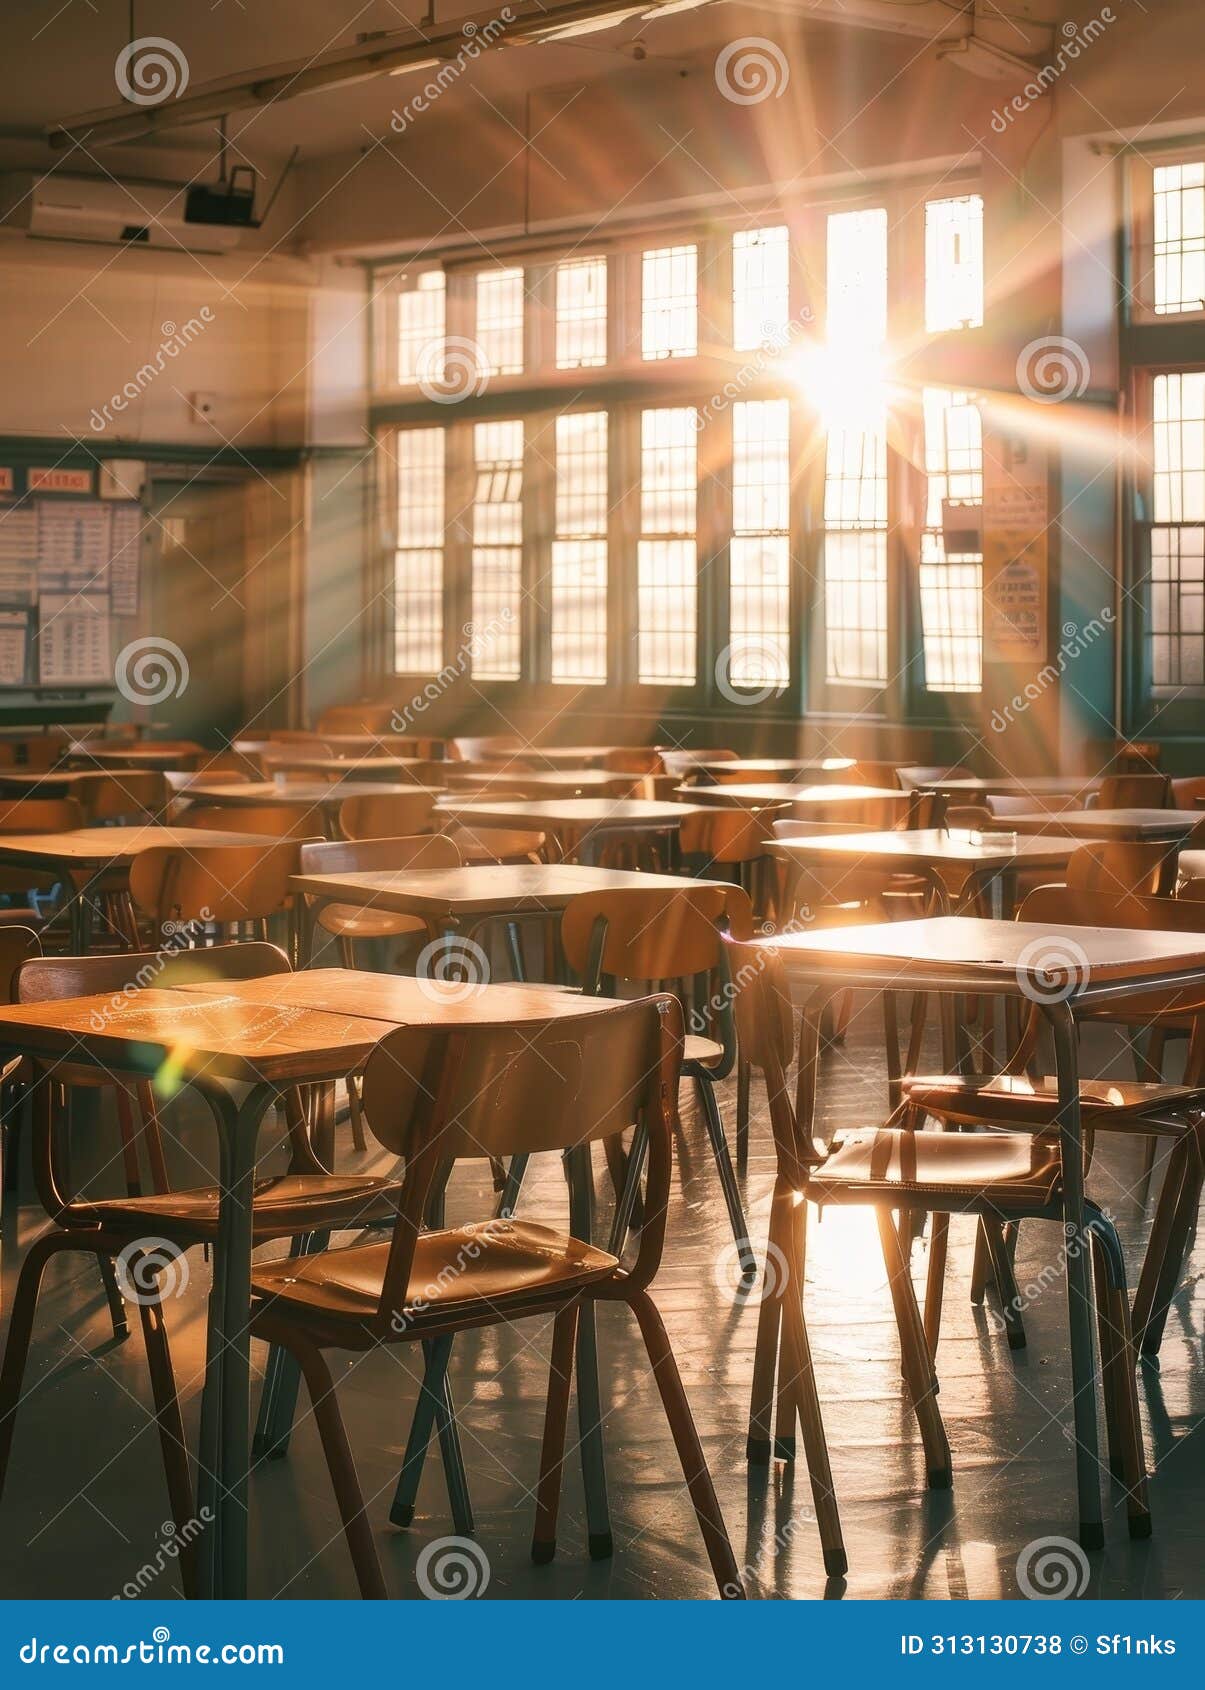 dramatic sunbeams filter through large windows, casting a warm glow over the vacant lunchroom filled with rows of wooden